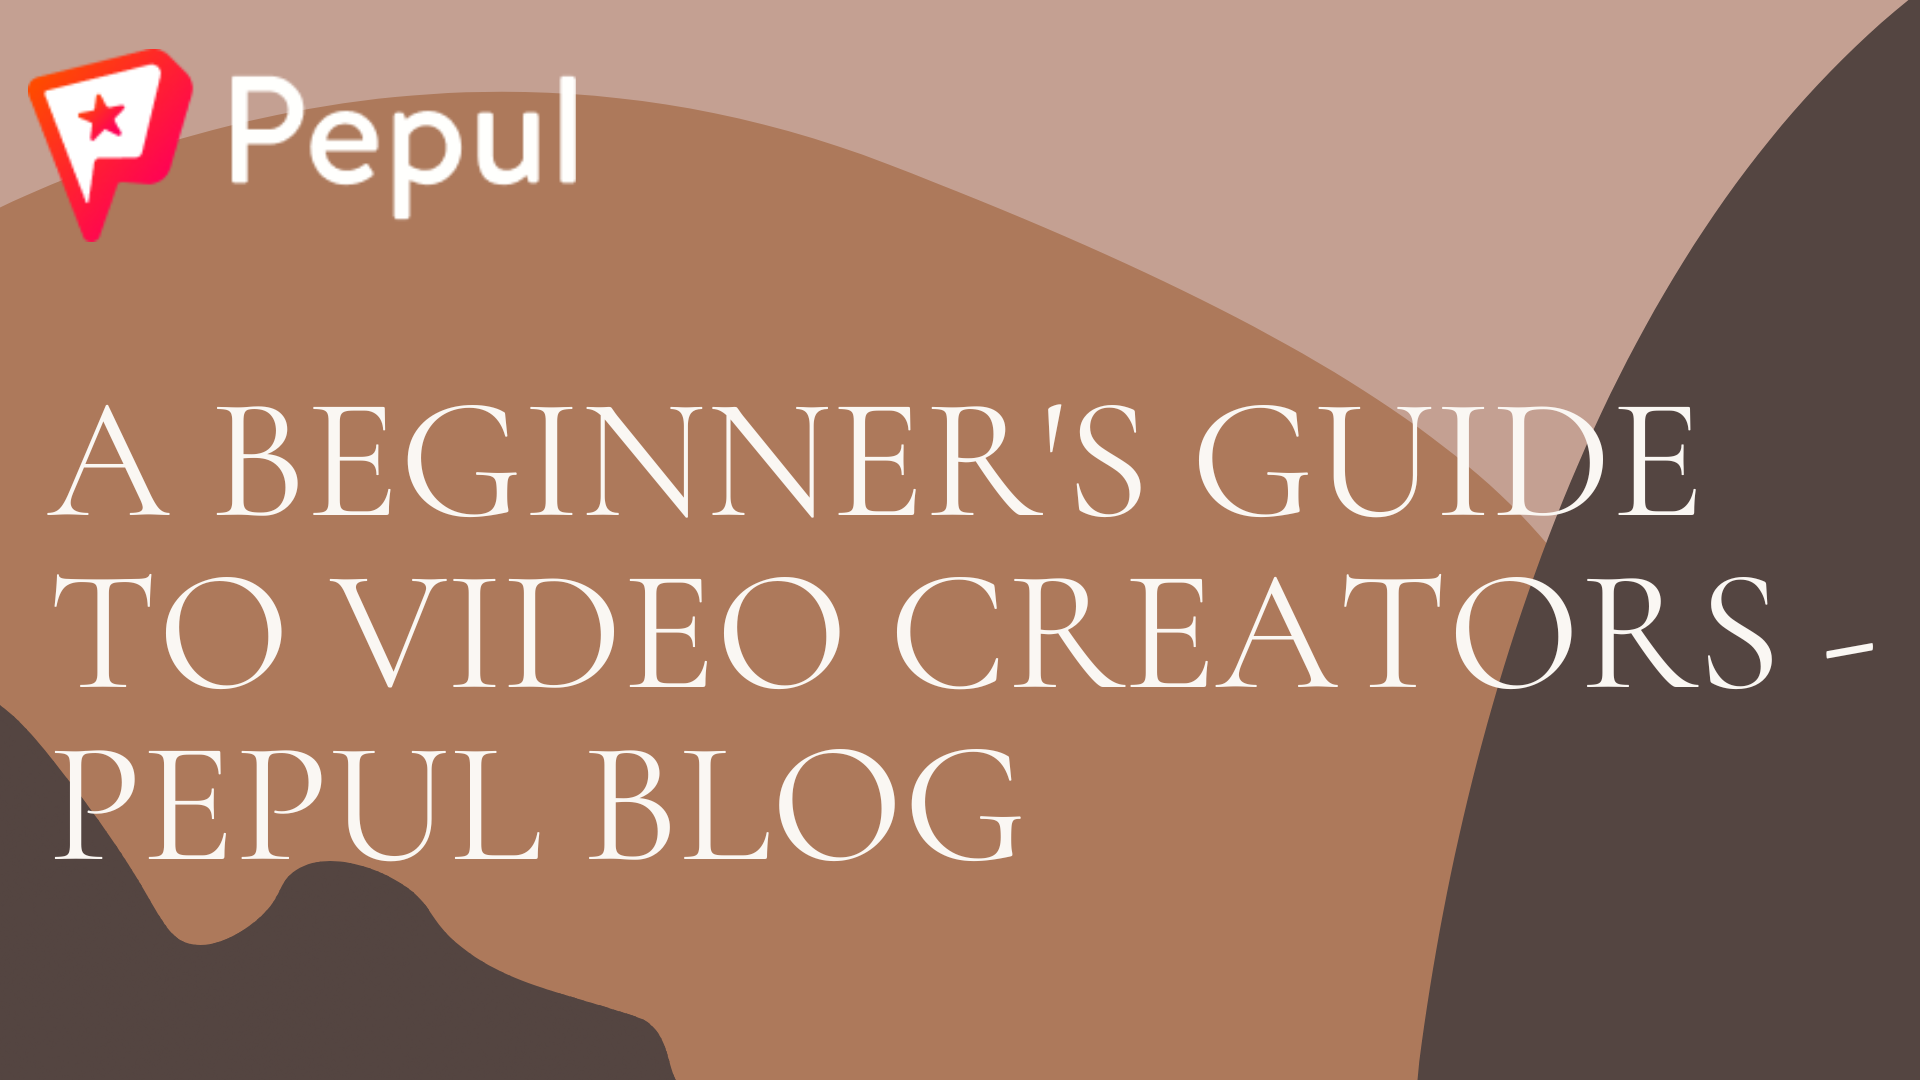 A Beginner’s Guide to Video Creators